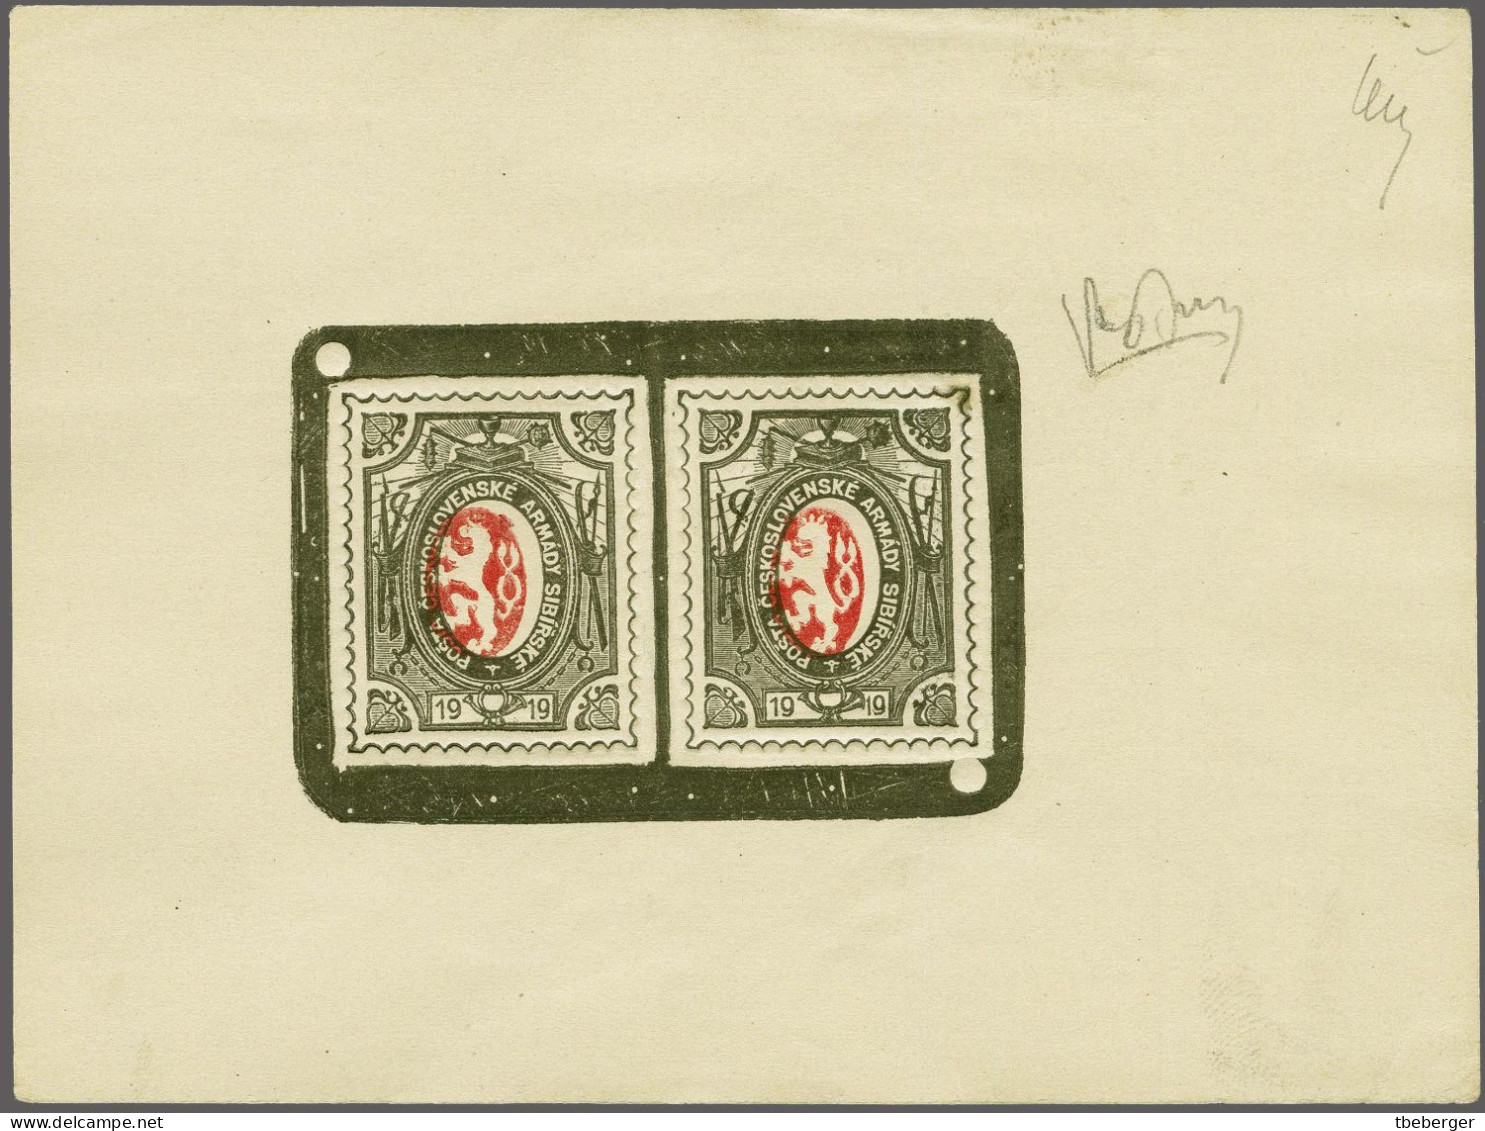 Czech Legion In Siberia 1919 Lion Issue, Two Embossed Colour Proofs In Sheetlet (3206, T32) - Legioni Cecoslovacche In Siberia